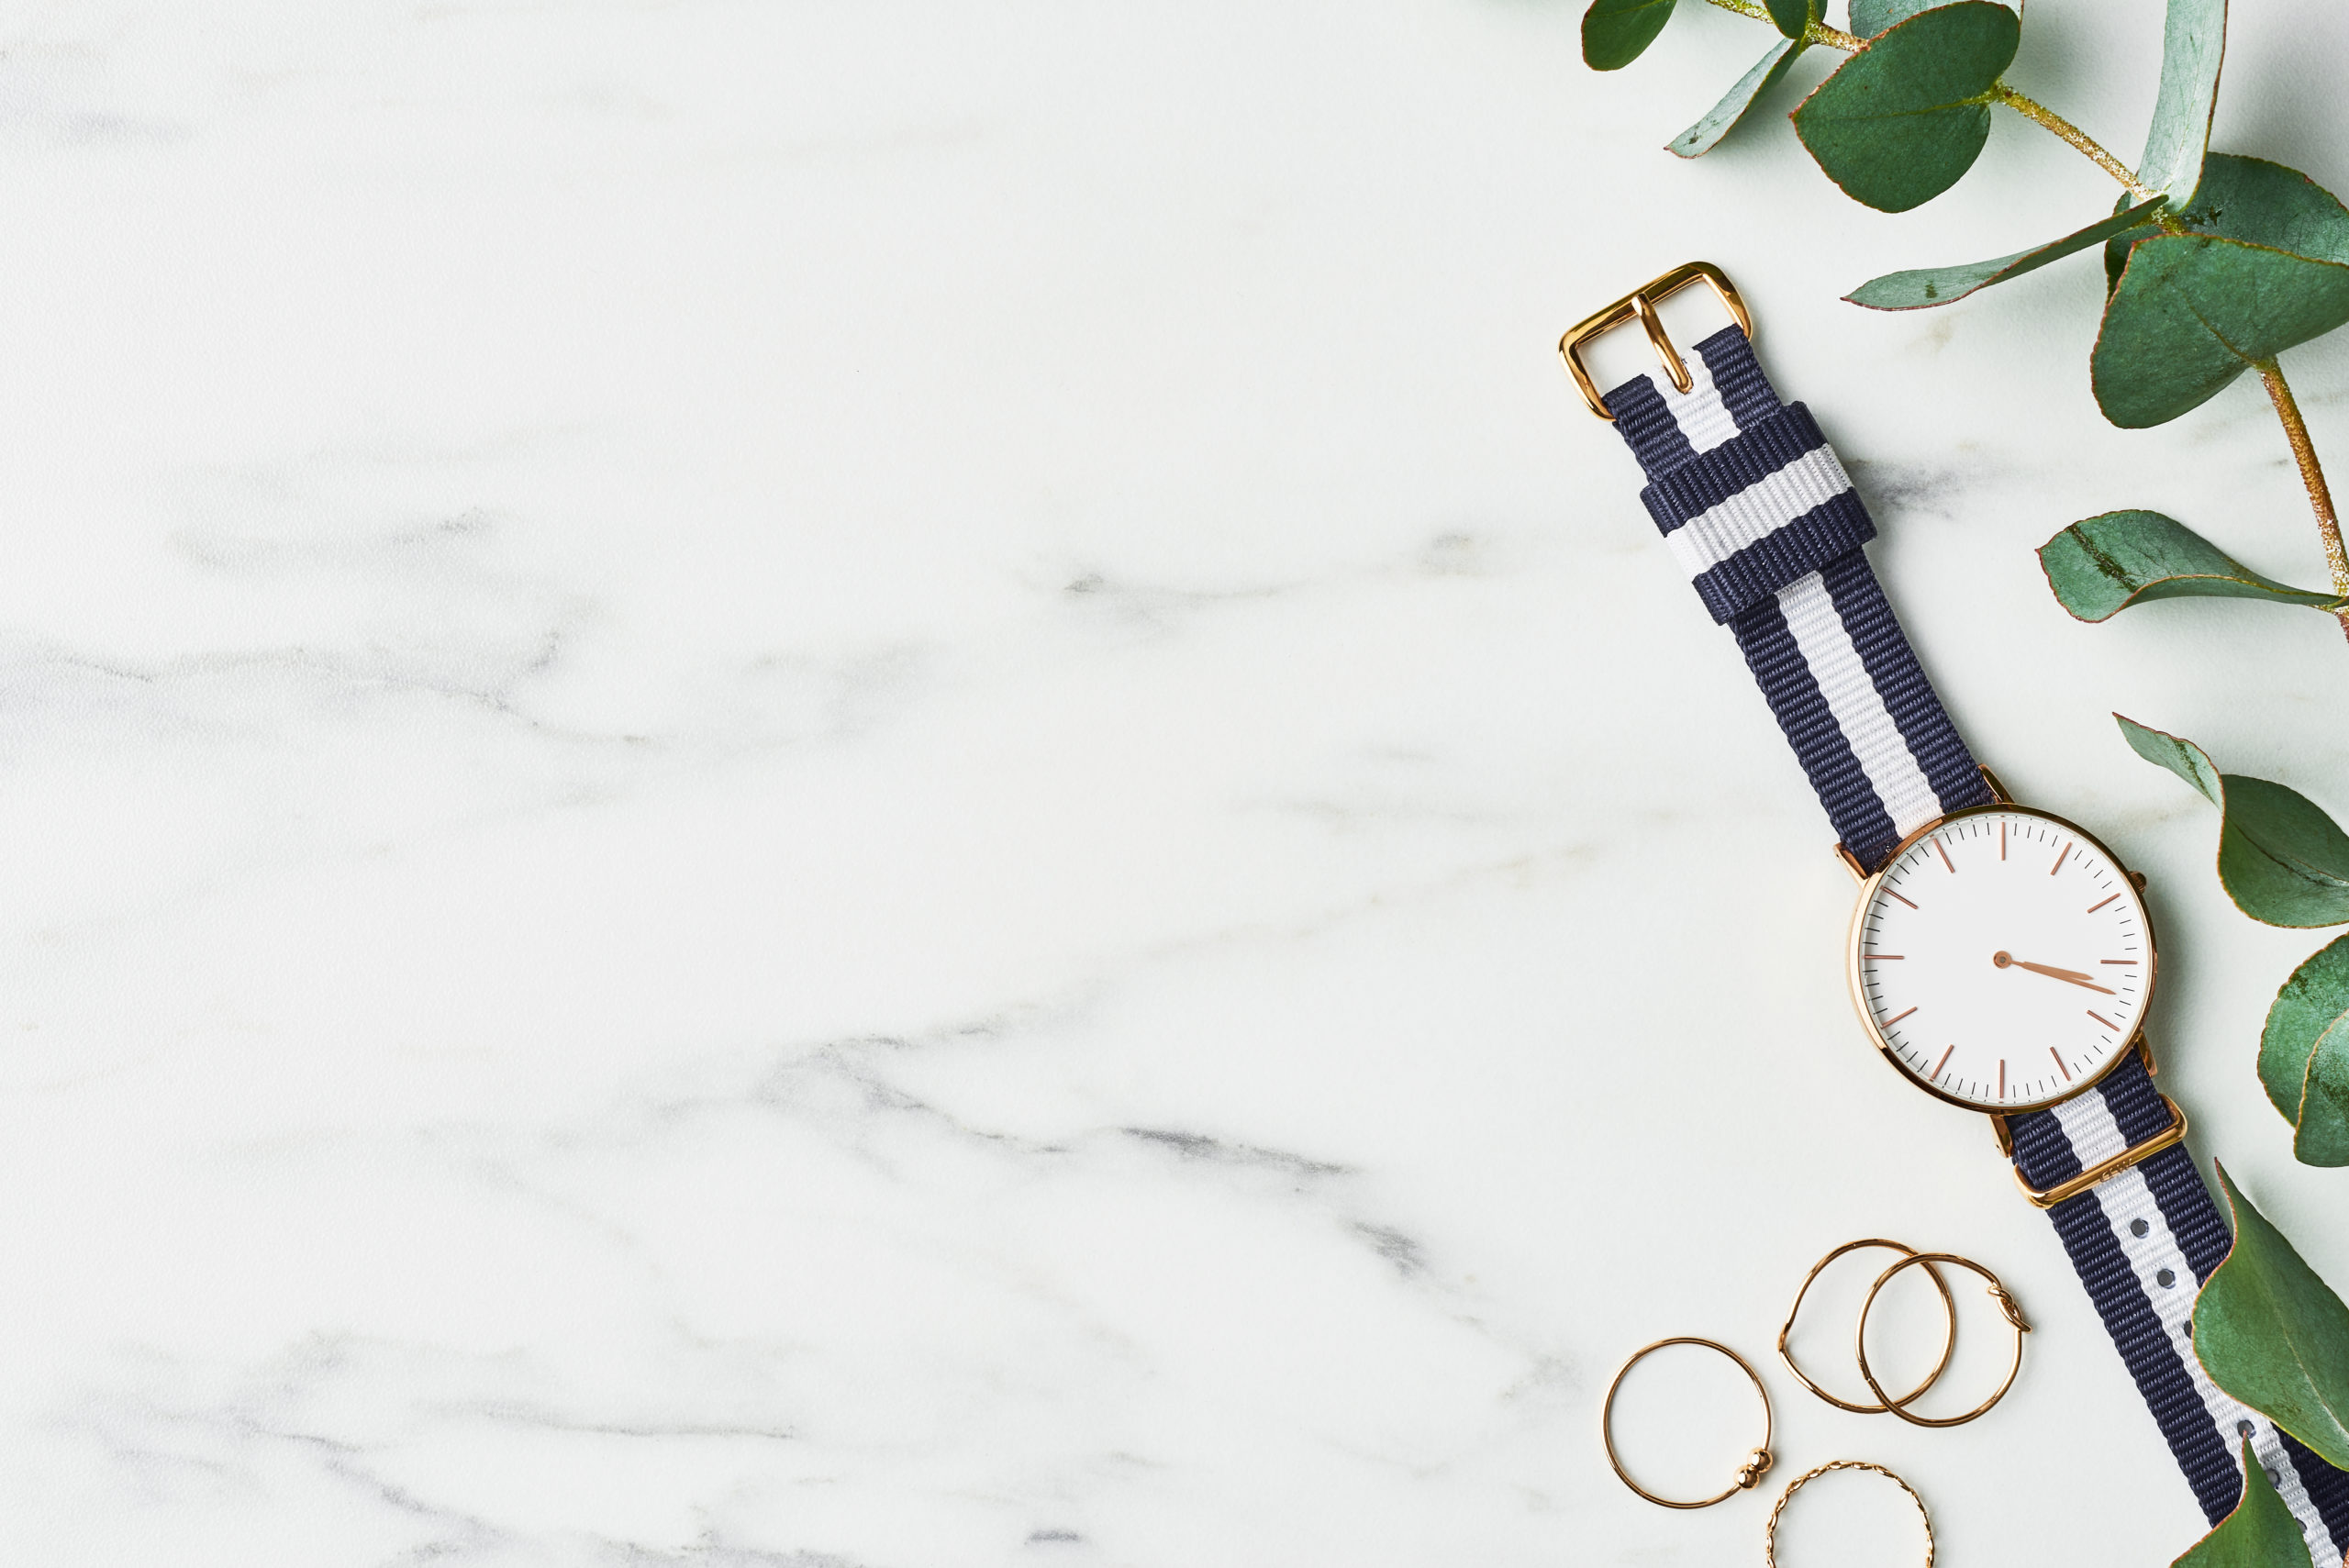 Women's watch with navy blue and white nylon strap, golden rings and eucalyptus on white marble background. Top view with copy space for text.